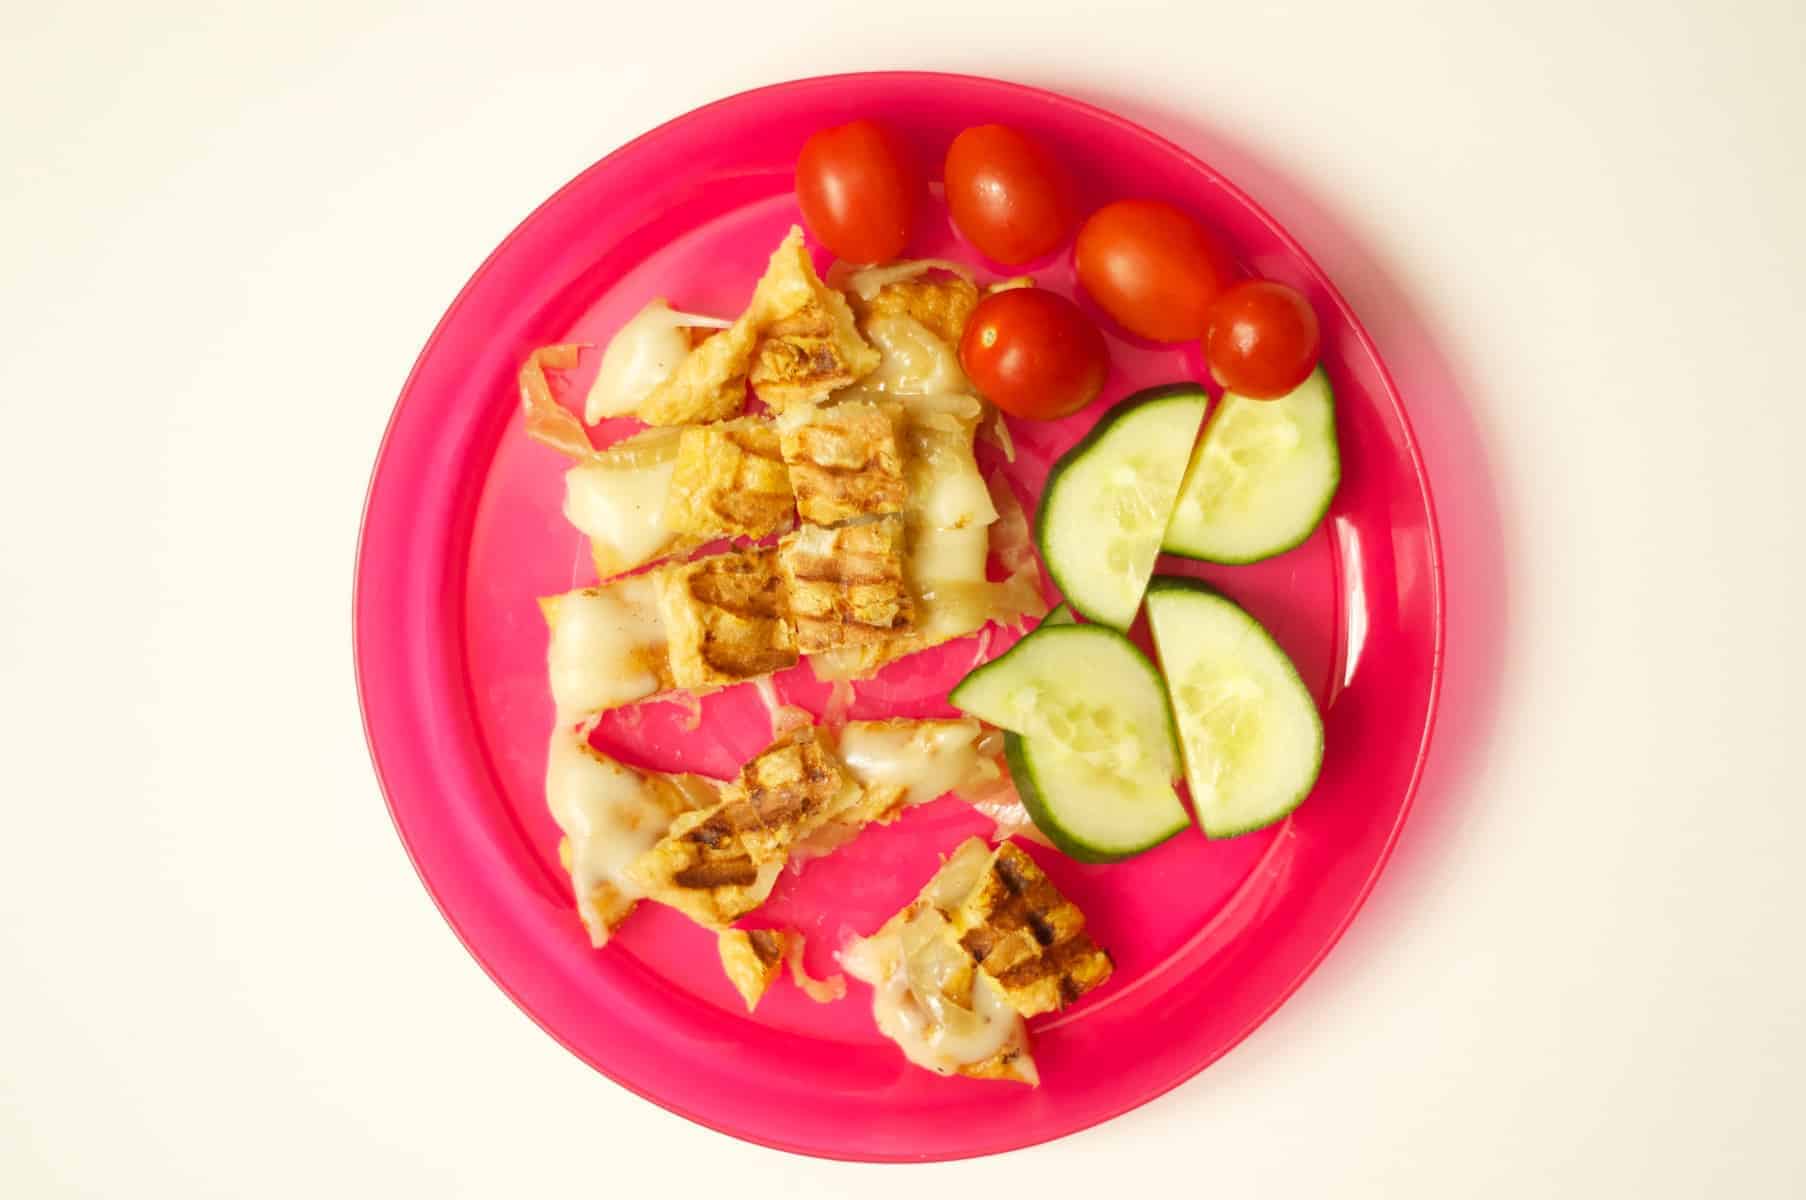 Toddler Lunch Ideas - Smart Nutrition with Jessica Penner, RD